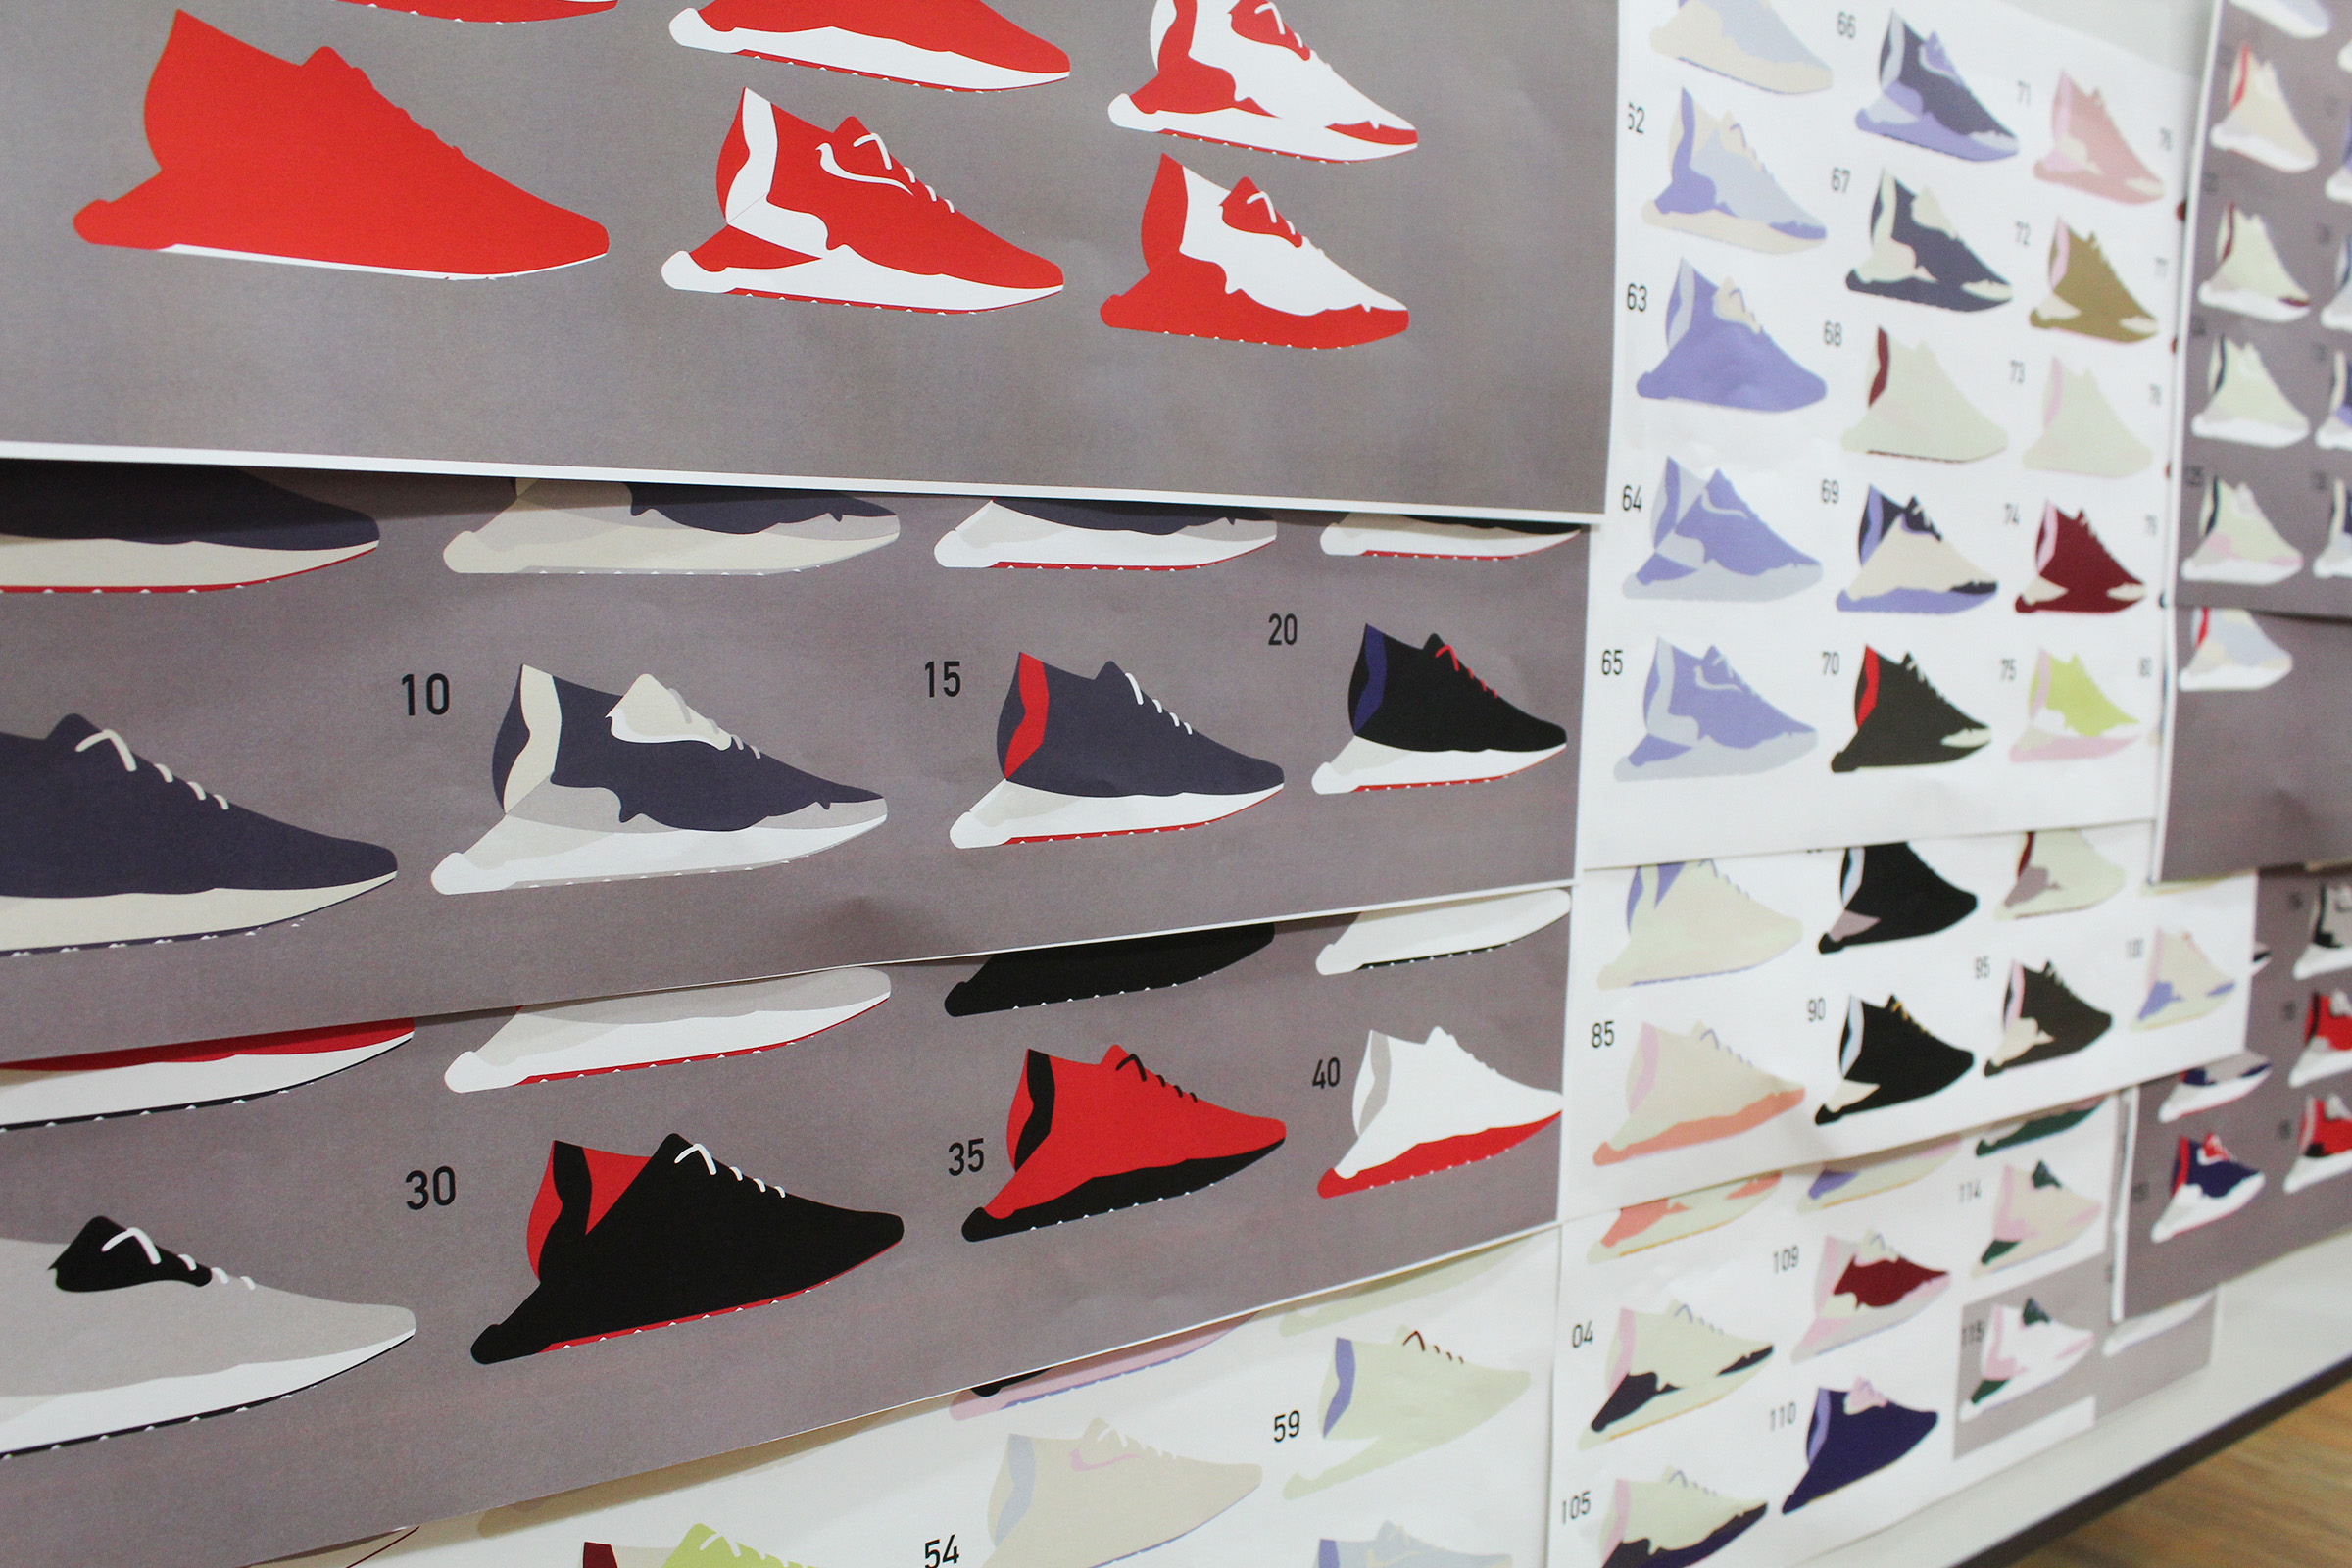 Under Armour starts with doing their core colorways